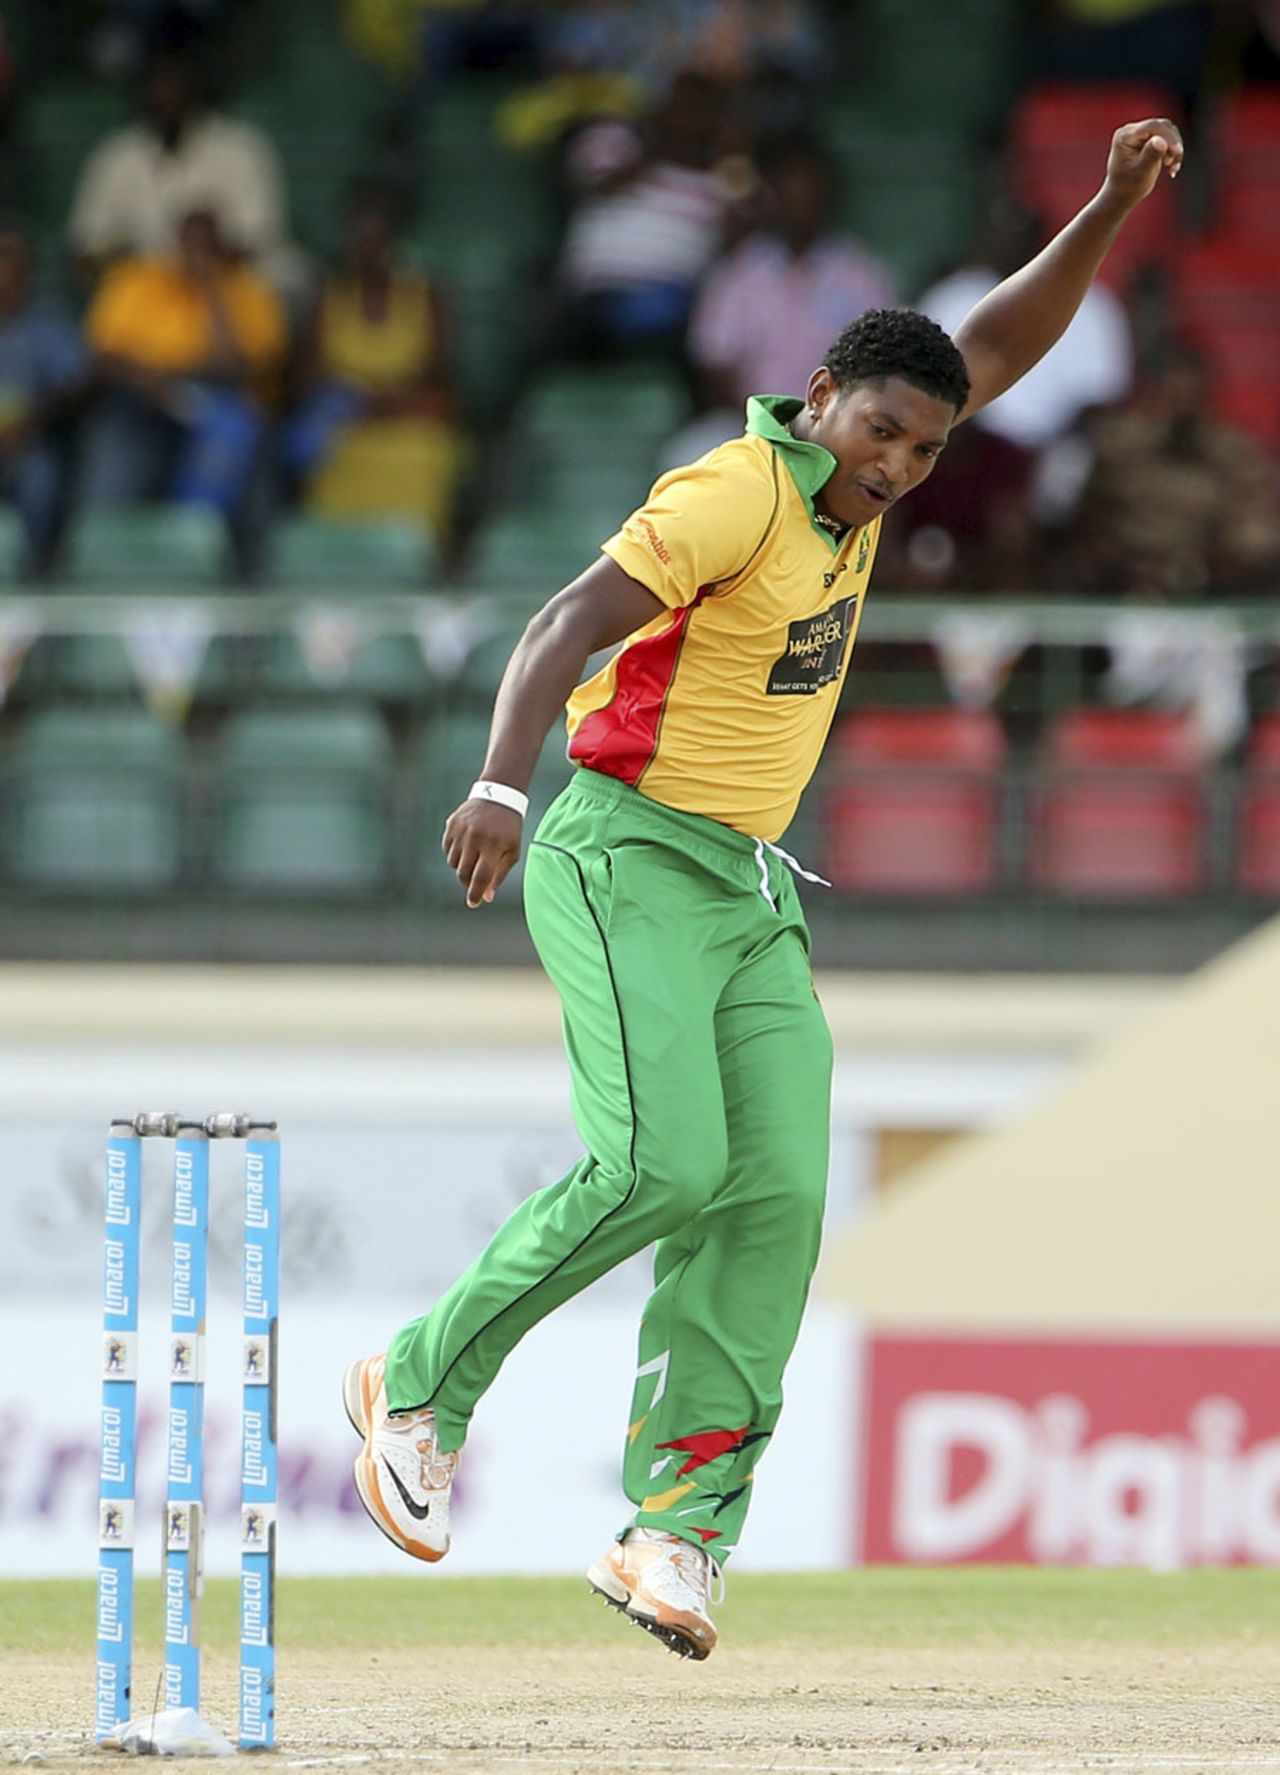 Krishmar Santokie picked up two wickets in his first two overs, Barbados Tridents v Guyana Amazon Warriors, CPL 2014 final, St Kitts, August 16, 2014